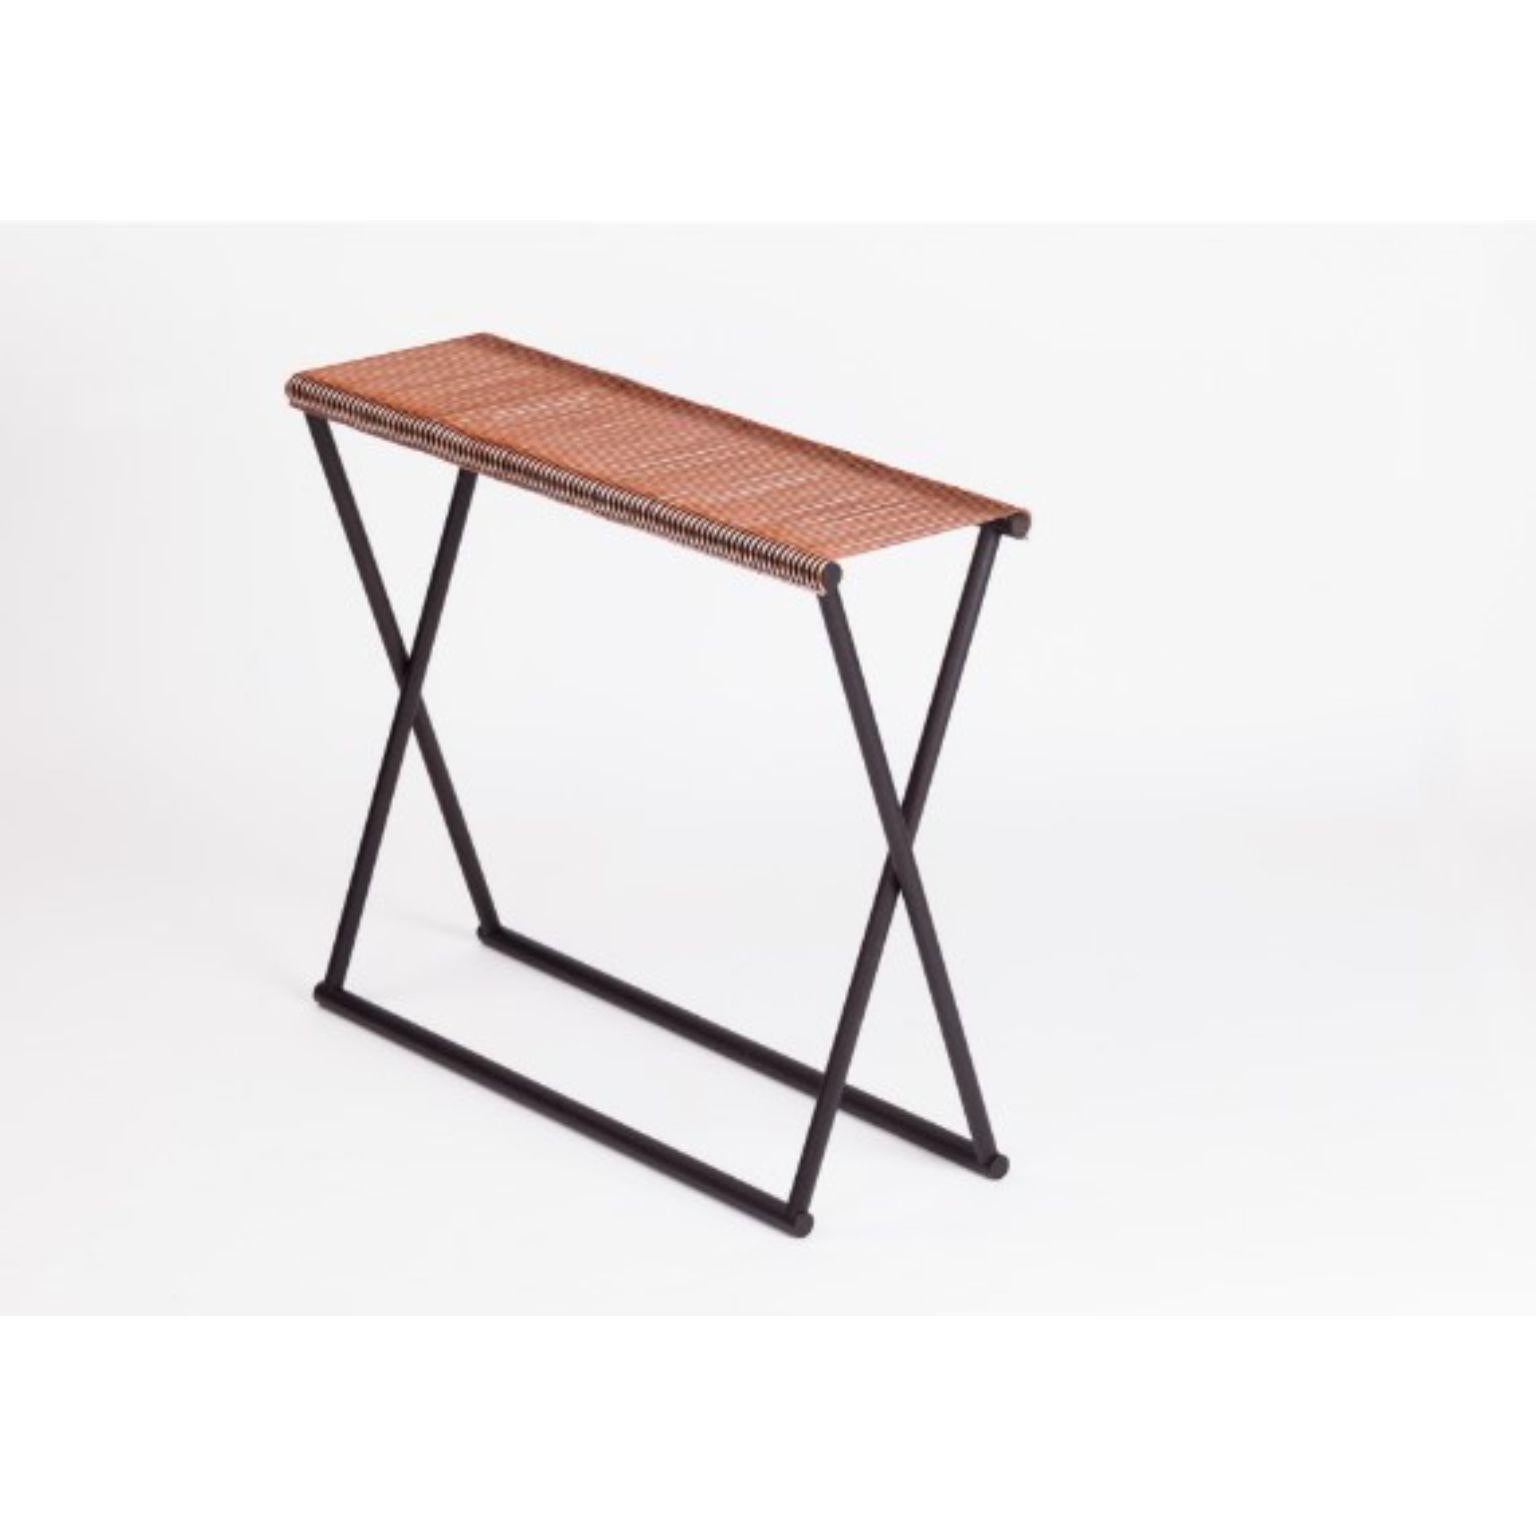 Trestle console by Mingardo
Dimensions: D96 x W32 x H80 cm 
Materials: natural or wengè oak wood structure. Satin natural brass/copper rods top.
Weight: 13 kg

Also available in different finishes.

The tables of Trestle collection are